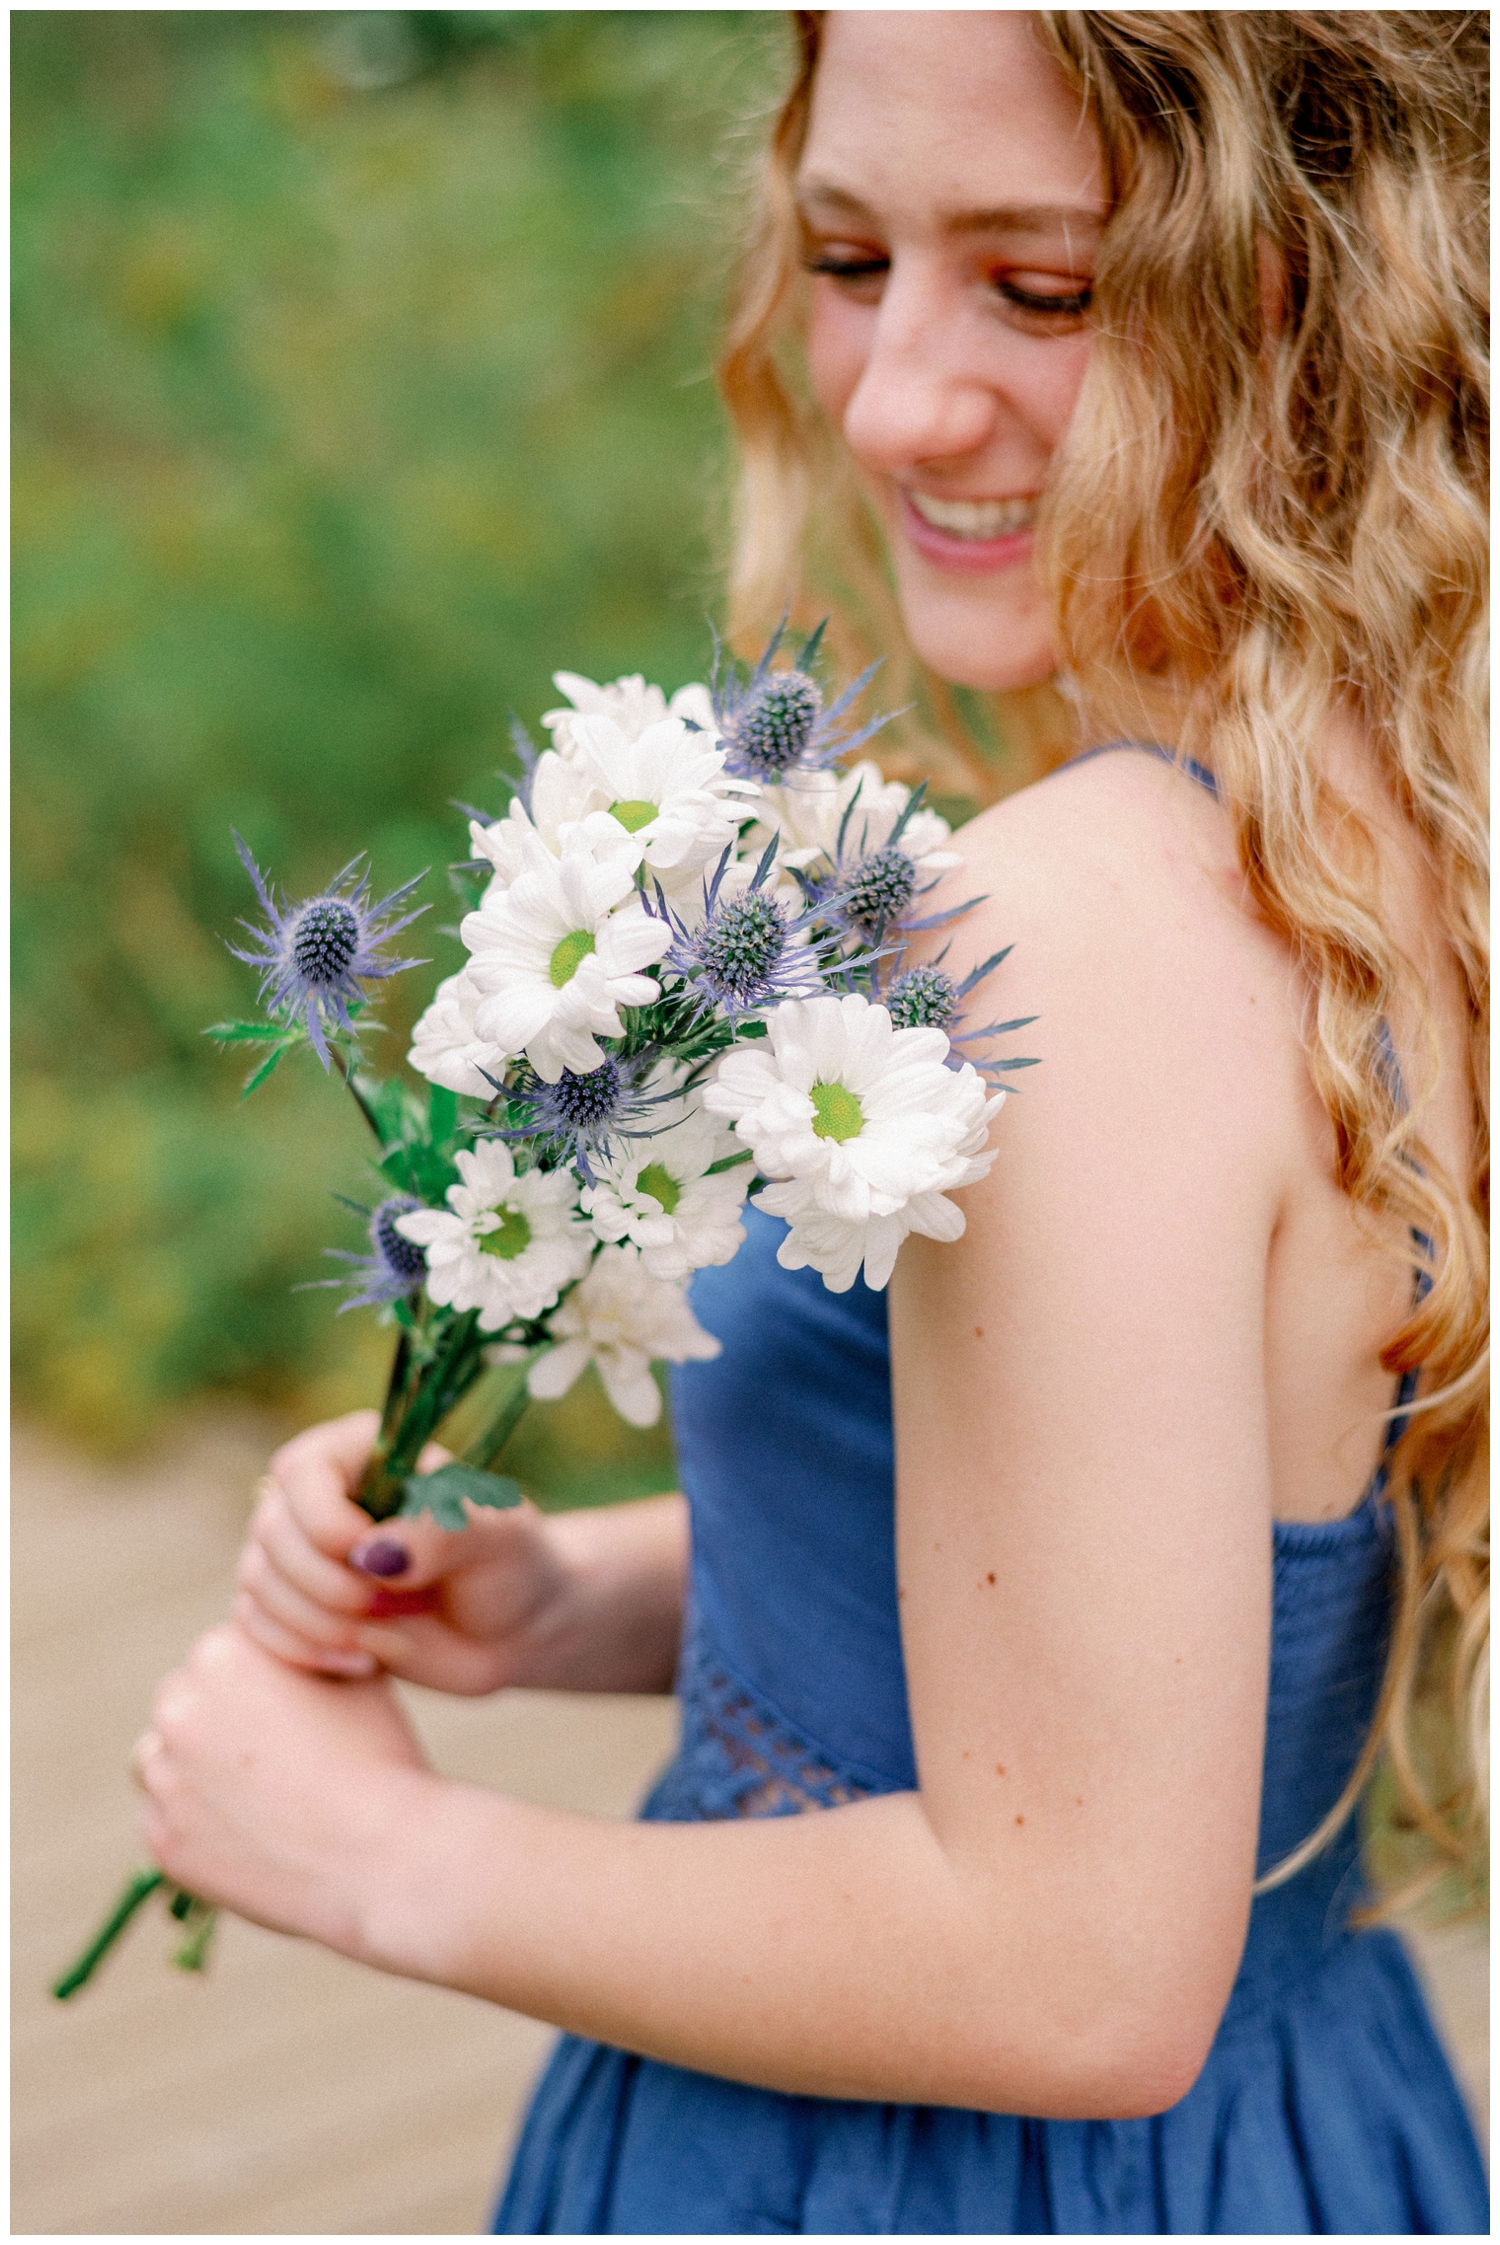 girl in denim dress holding white flowers and looking at them